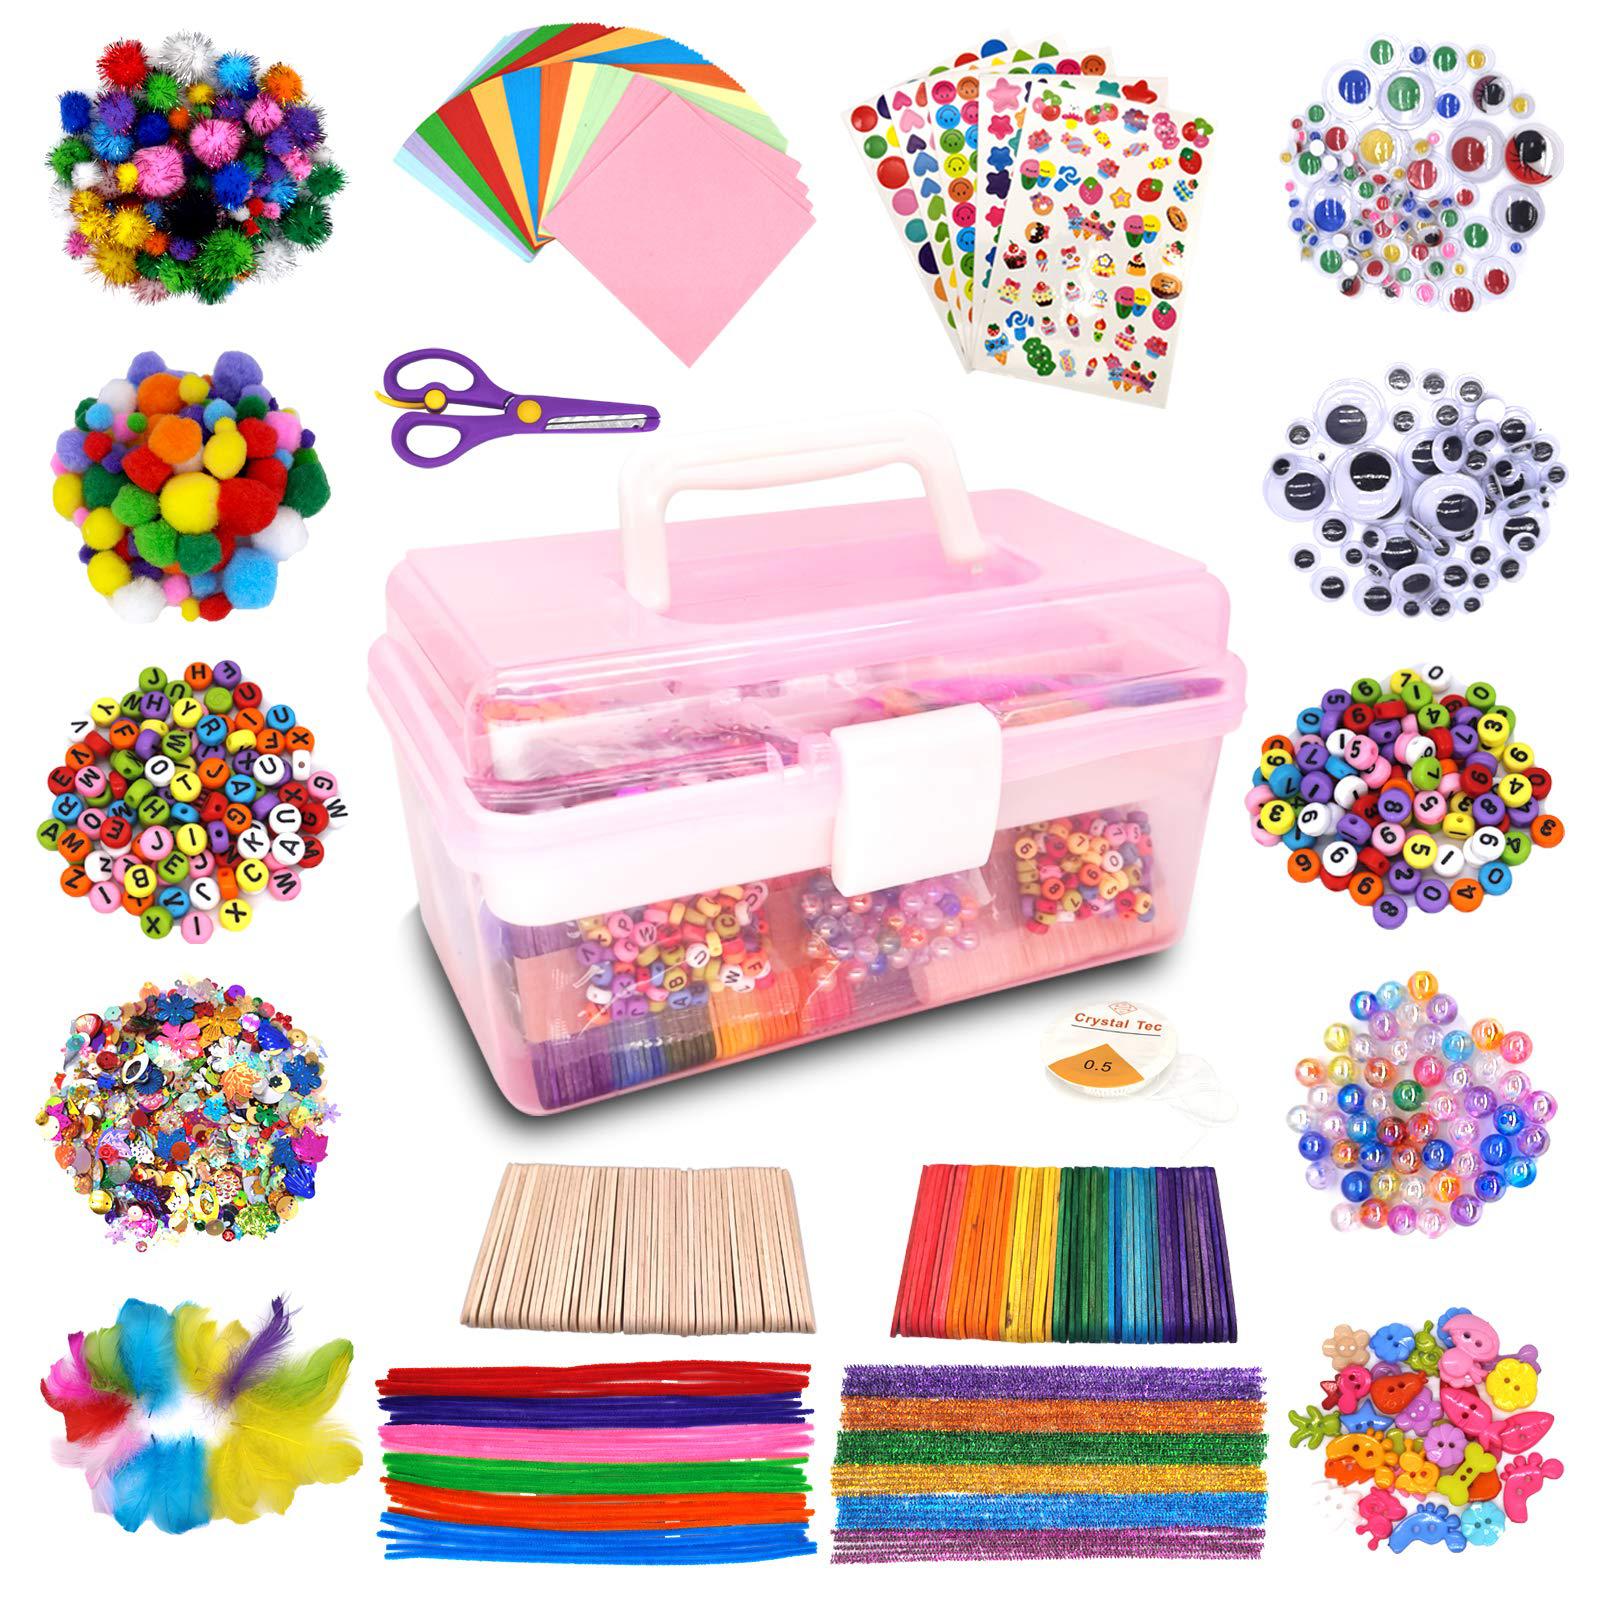 IRICHNA irichna 1000+ pcs art and craft supplies for kids, toddler diy craft  art supply set included pom poms, pipe cleaners, feather